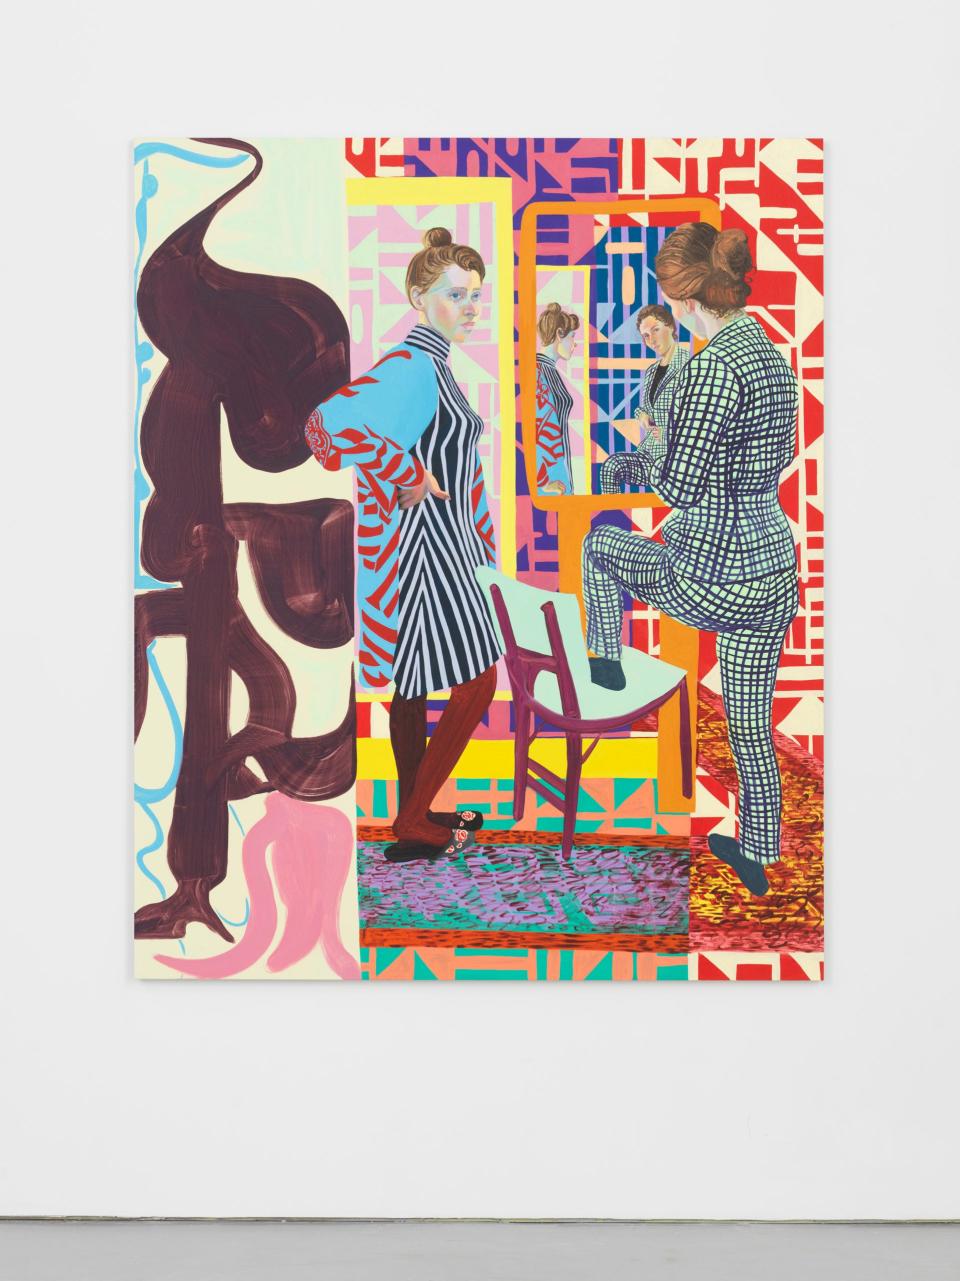 Aliza Nisenbaum. "Patricia and I Boogie on Broadway" (2019). Oil on linen. Aliza
Nisenbaum
Collection of Jacky Aizenman. Image courtesy of the 
Anton Kern Gallery, New York.